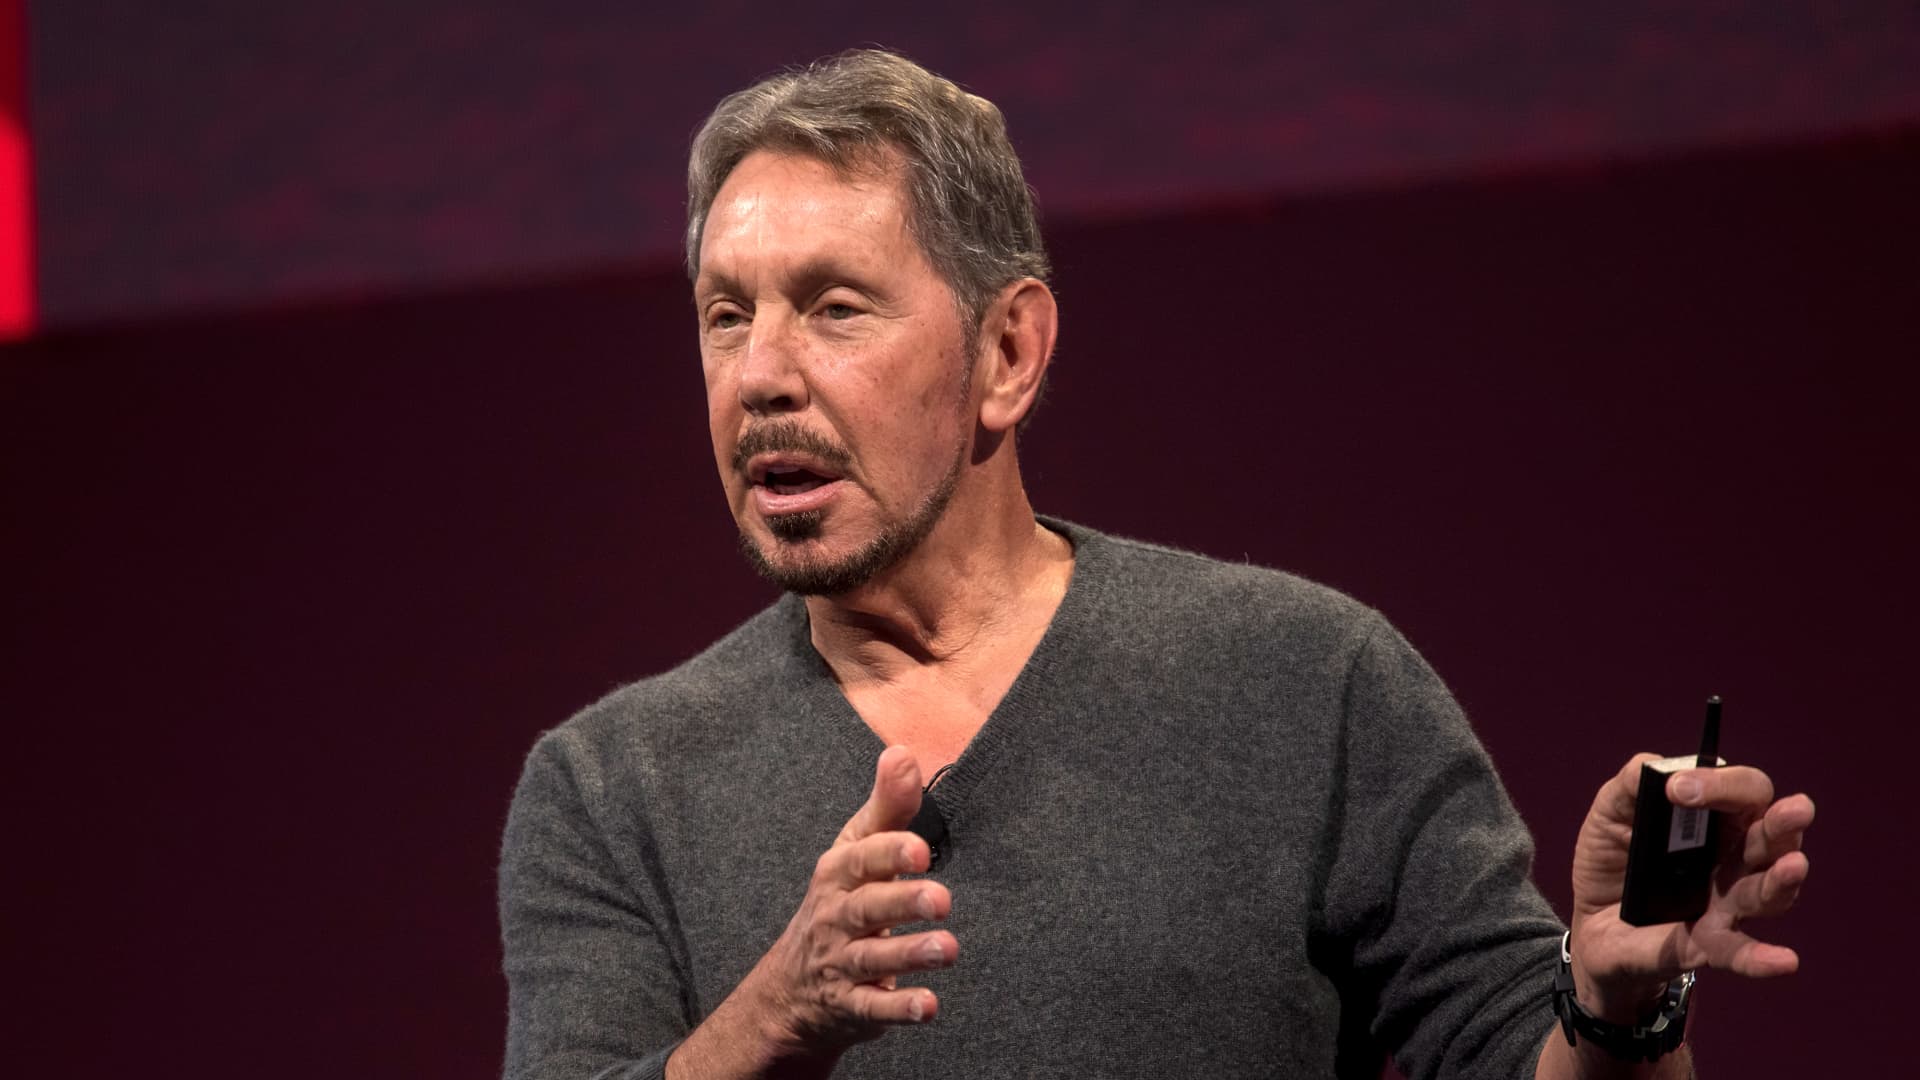 Oracle stock down more than 10% on light cloud revenue